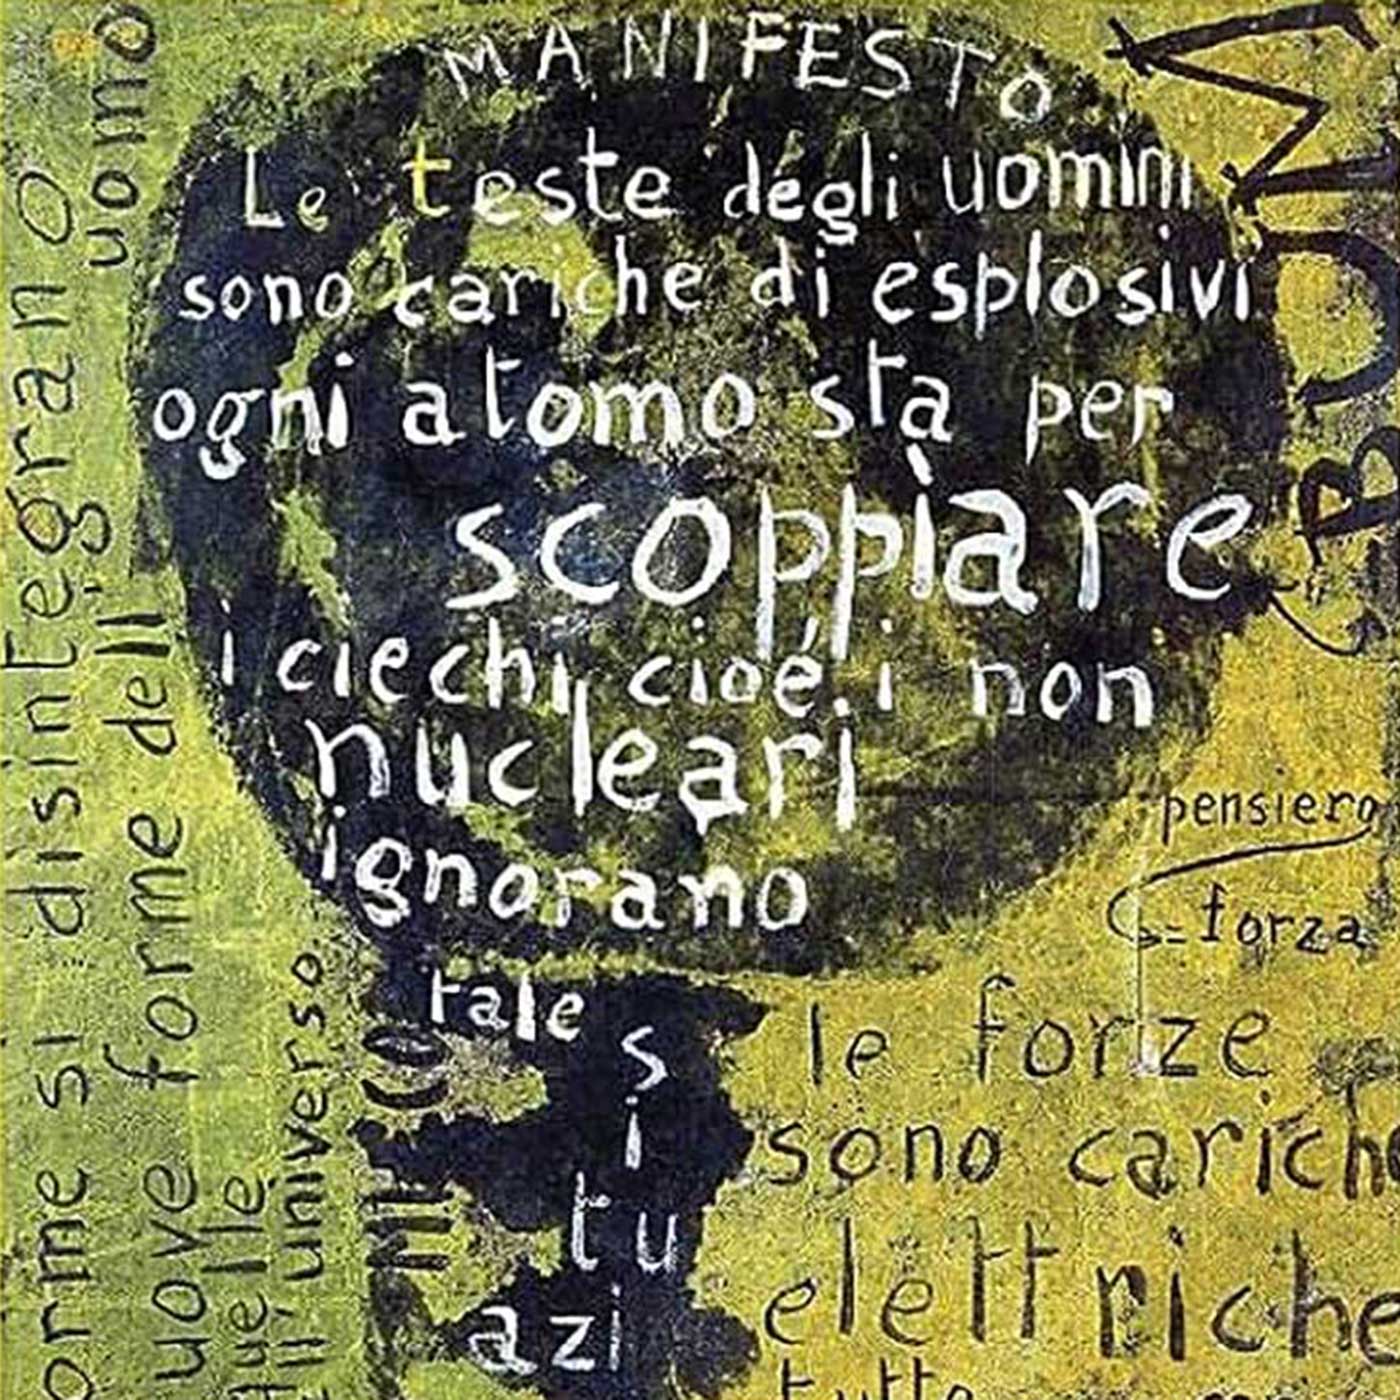 Painting of a mushroom cloud shape with Italian words on top